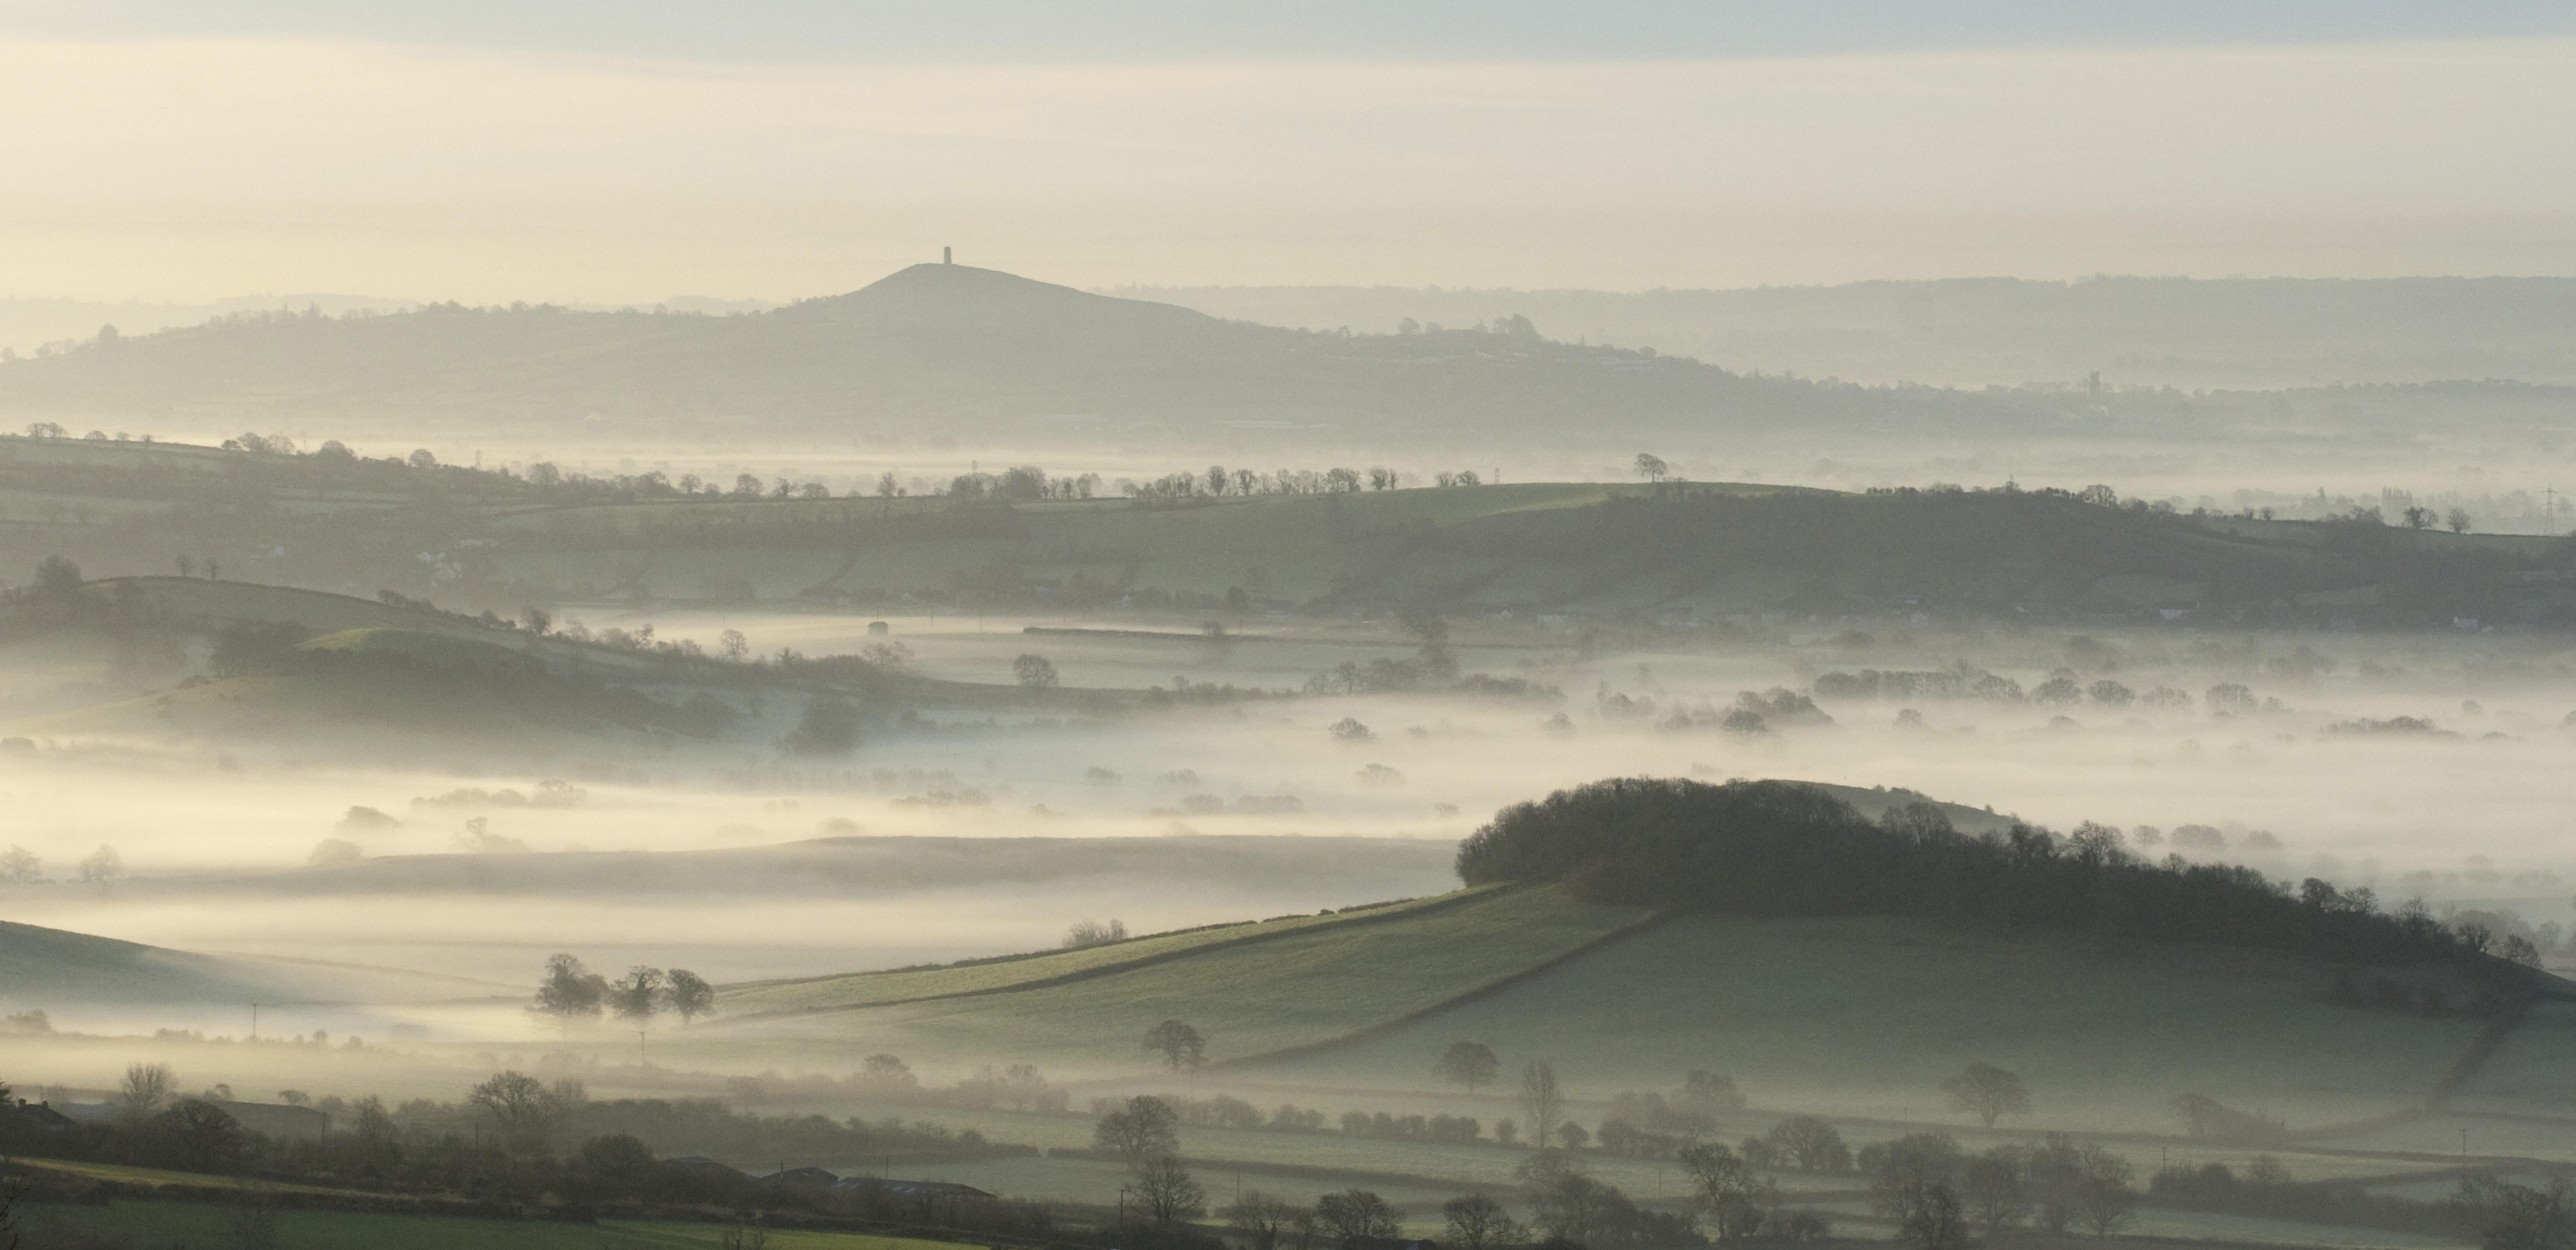 Where I live in Somerset, in south-west England, Glastonbury Tor can be seen from every direction. Its distinctive shape -a hump of land topped by the tower of a church that collapsed long ago- often emerges from the early morning mists. Some say